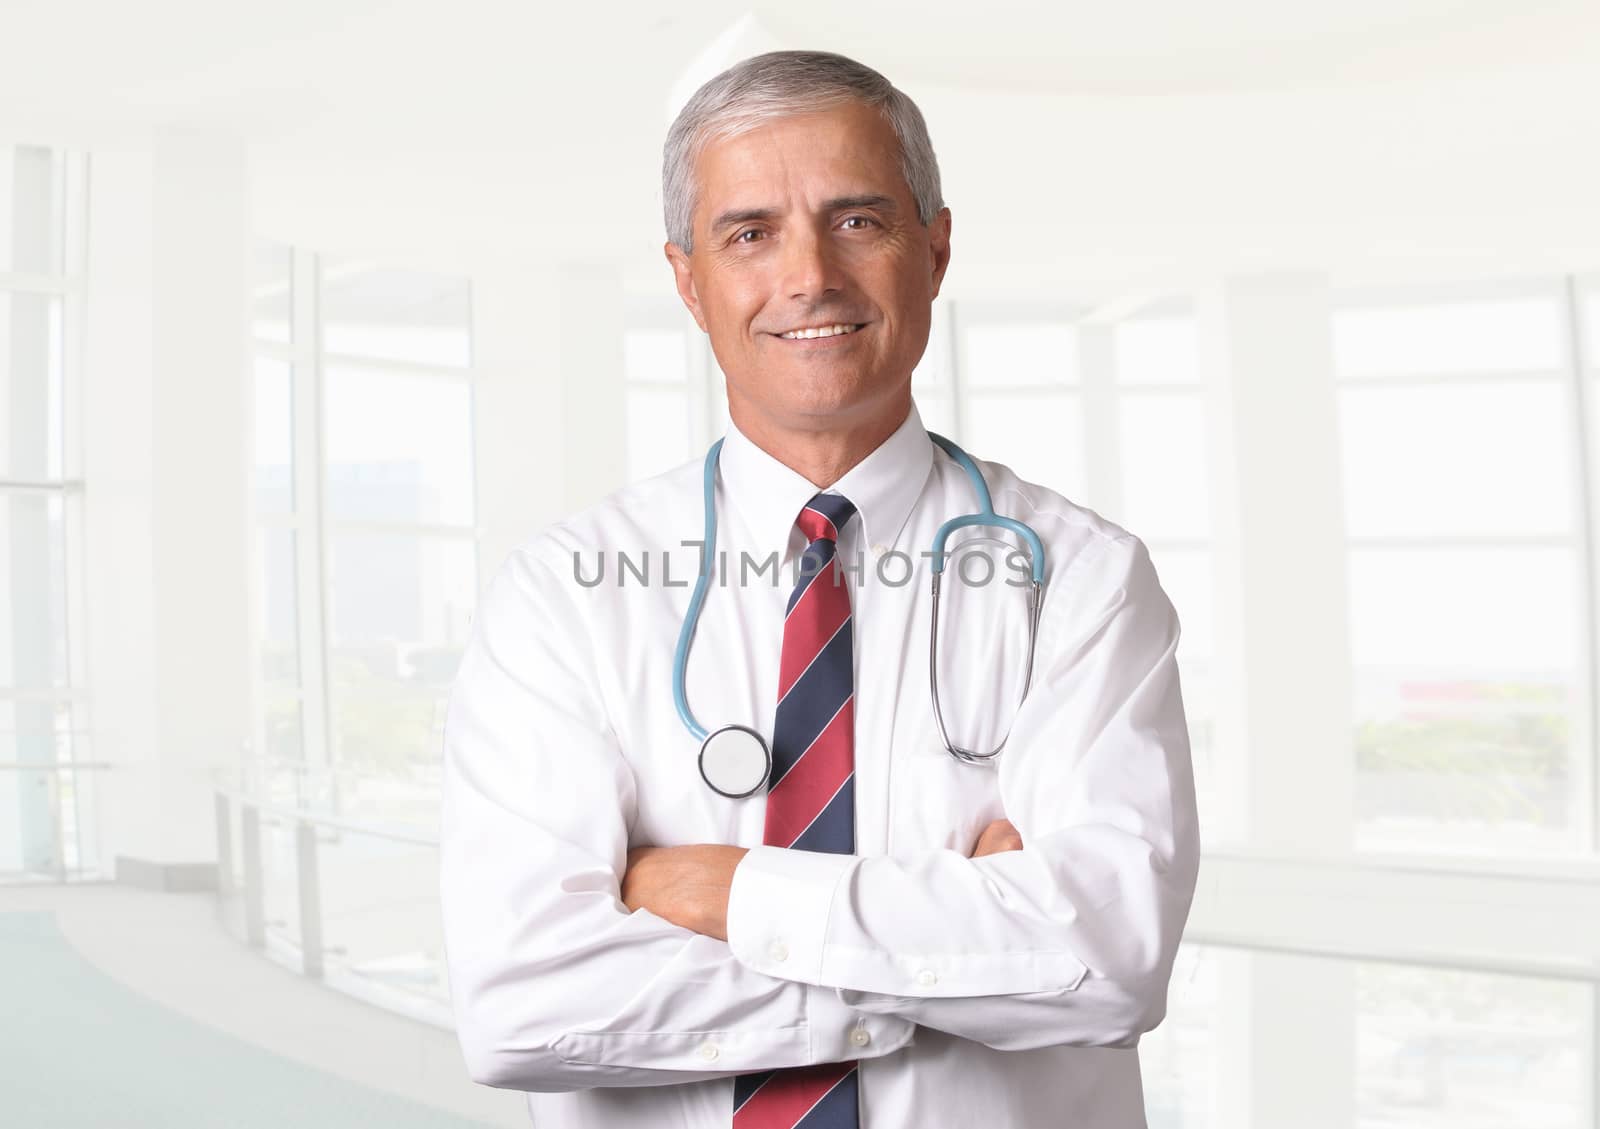 Smiling male doctor in scrubs with a stethoscope around his neck and his arms crossed. Vertical format torso view with high key background.
